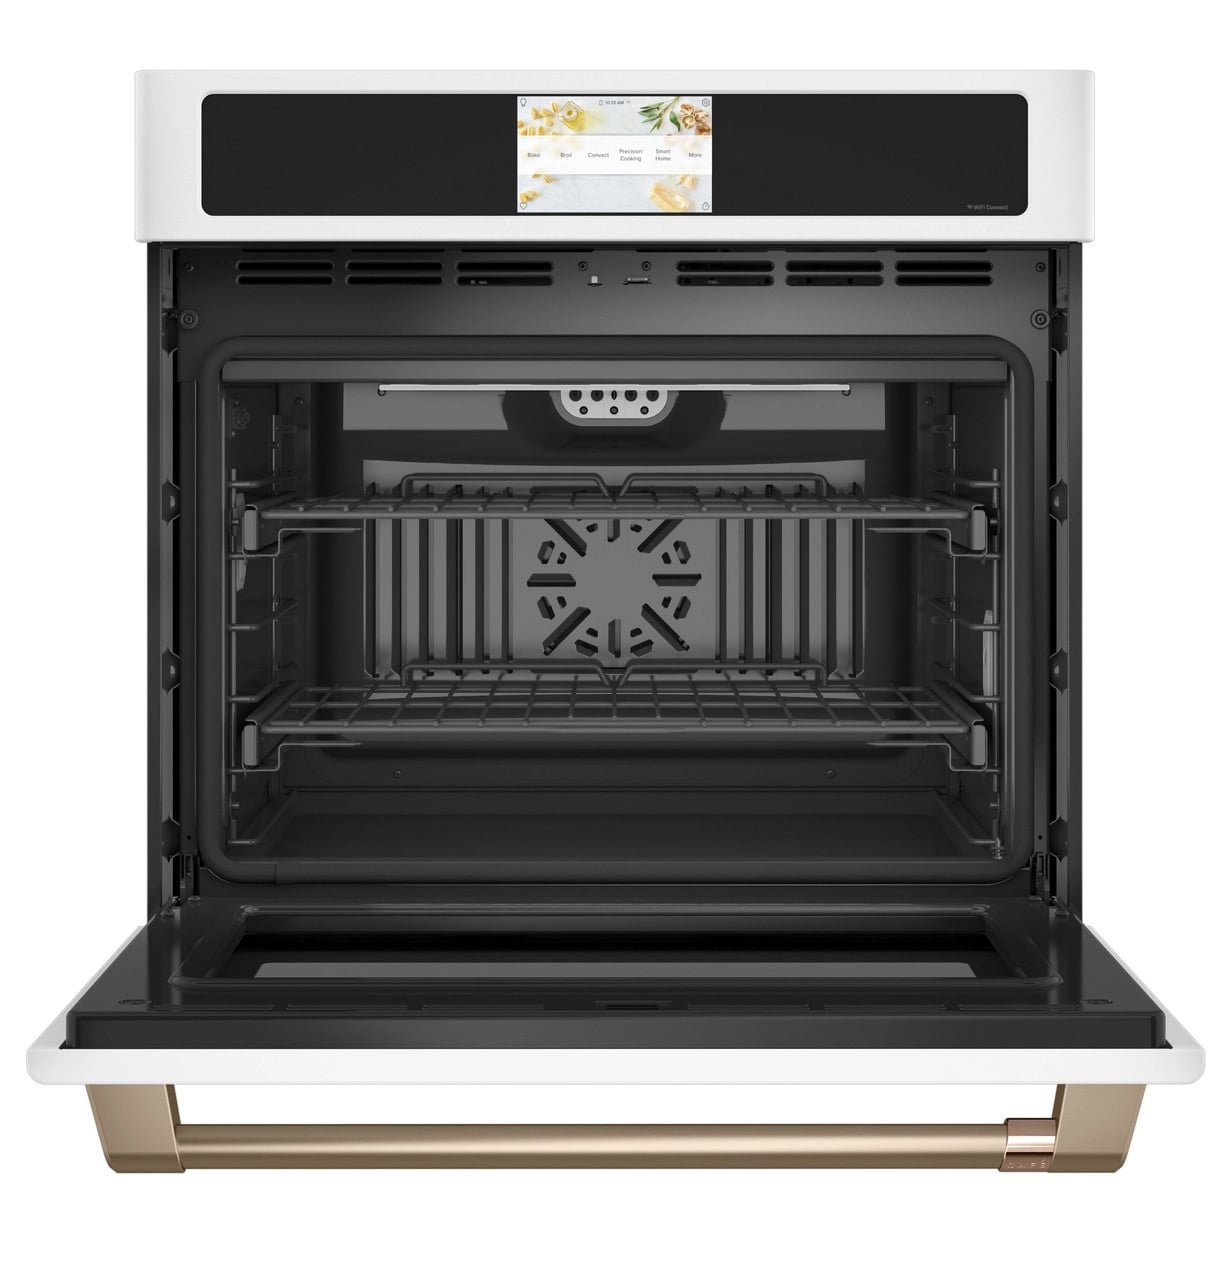 Café - 5 cu. ft Single Wall Oven in White - CTS90DP4NW2